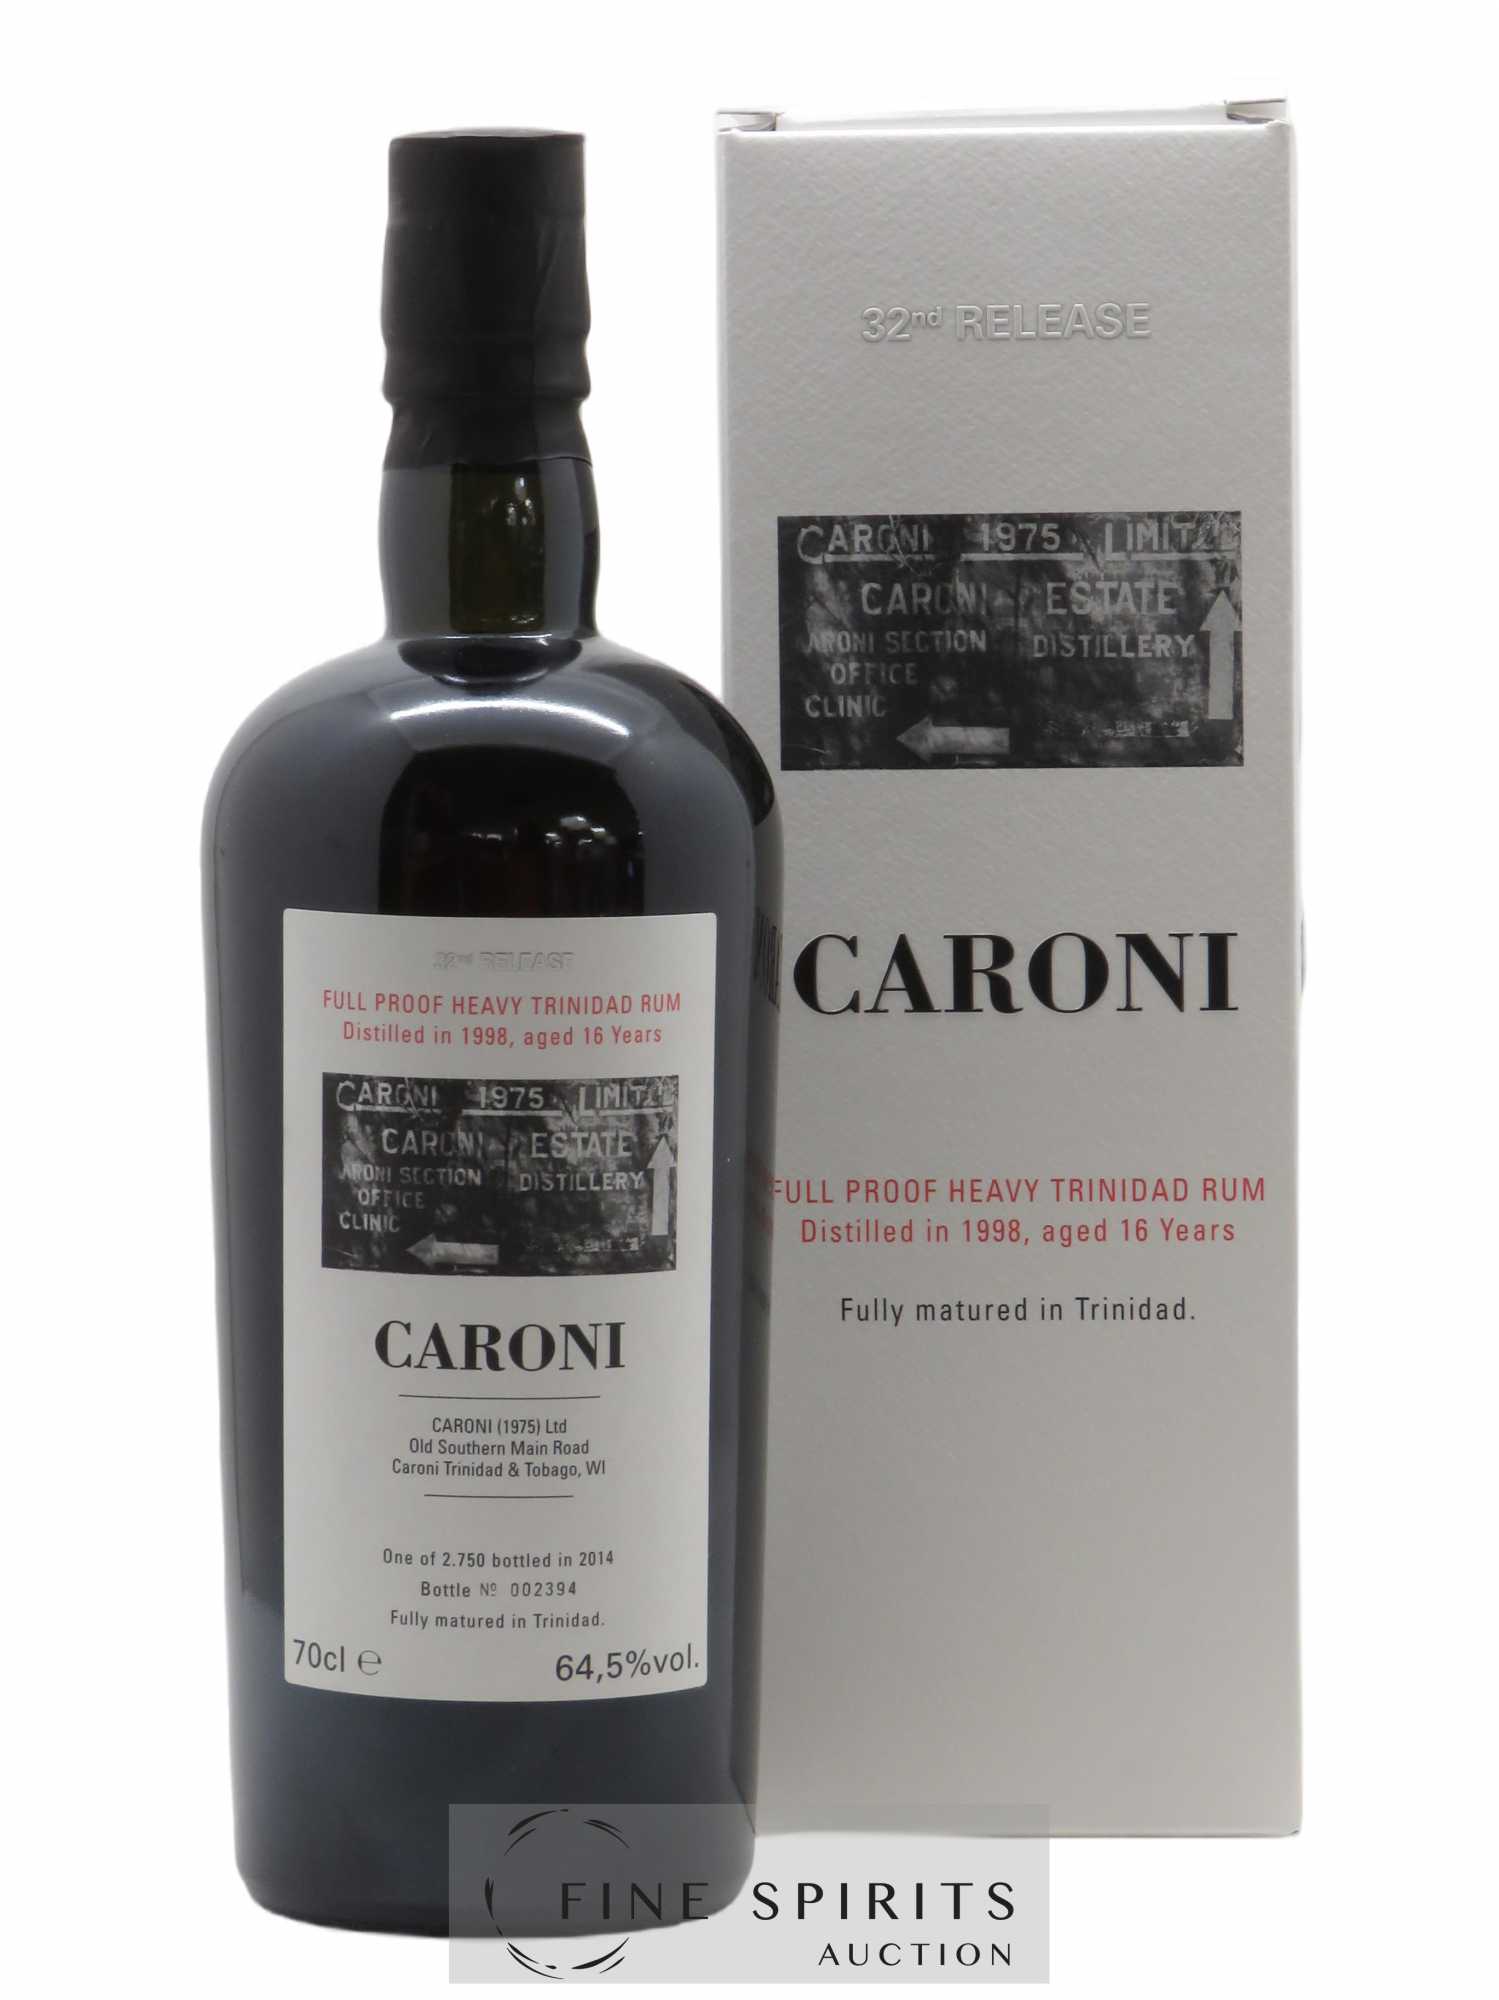 Caroni 16 years 1998 Velier Full Proof 32nd Release - One of 2750 - bottled 2014